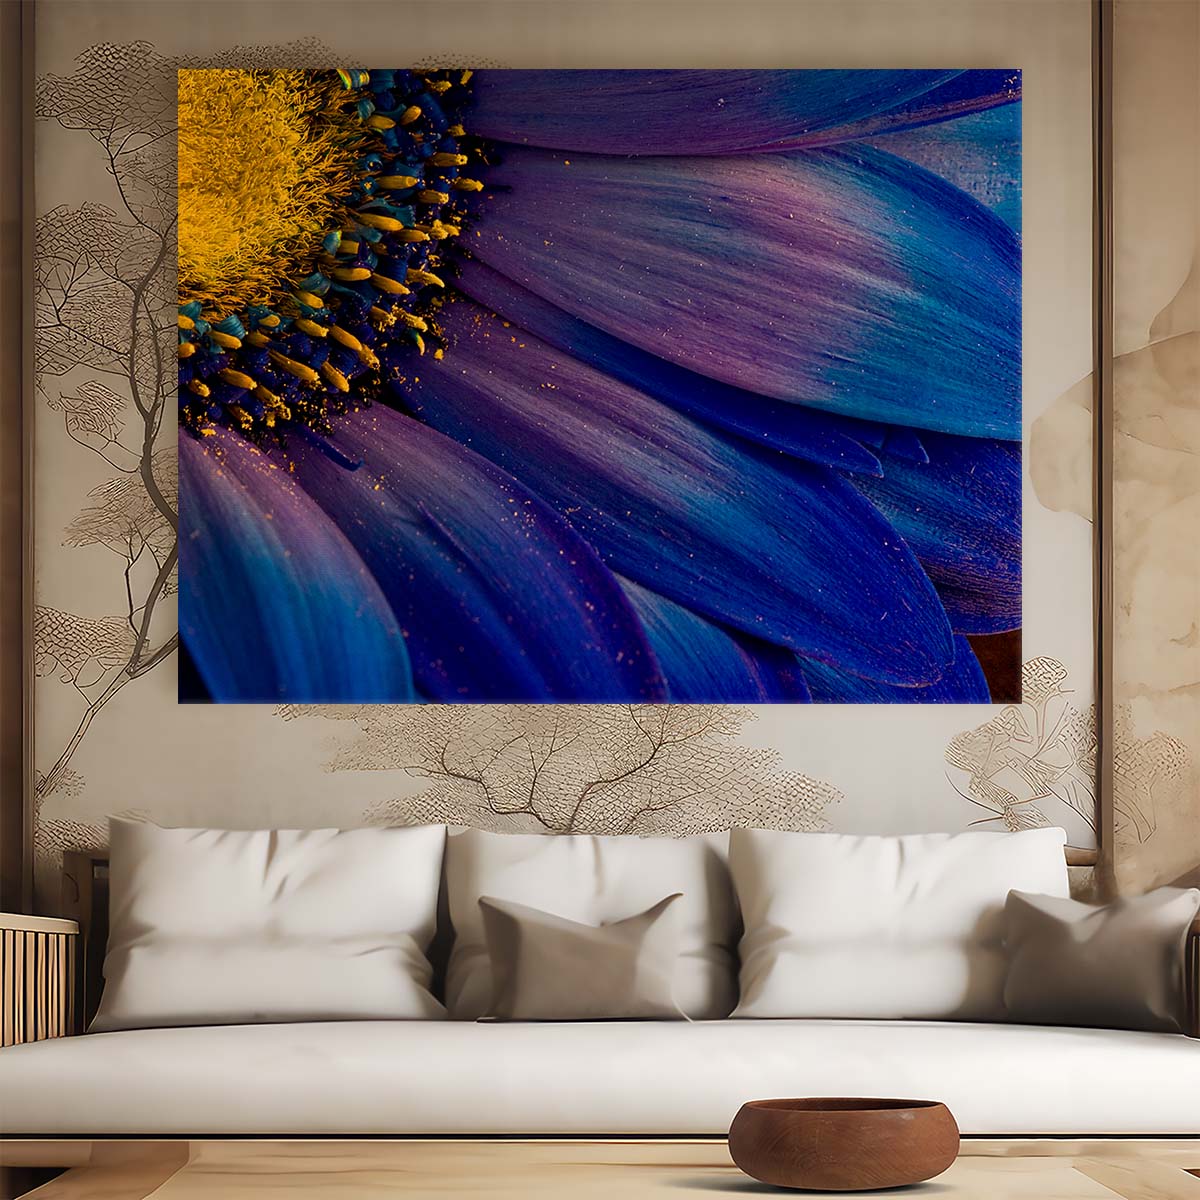 Stunning Icelandic Purple Daisy Macro Floral Wall Art by Luxuriance Designs. Made in USA.